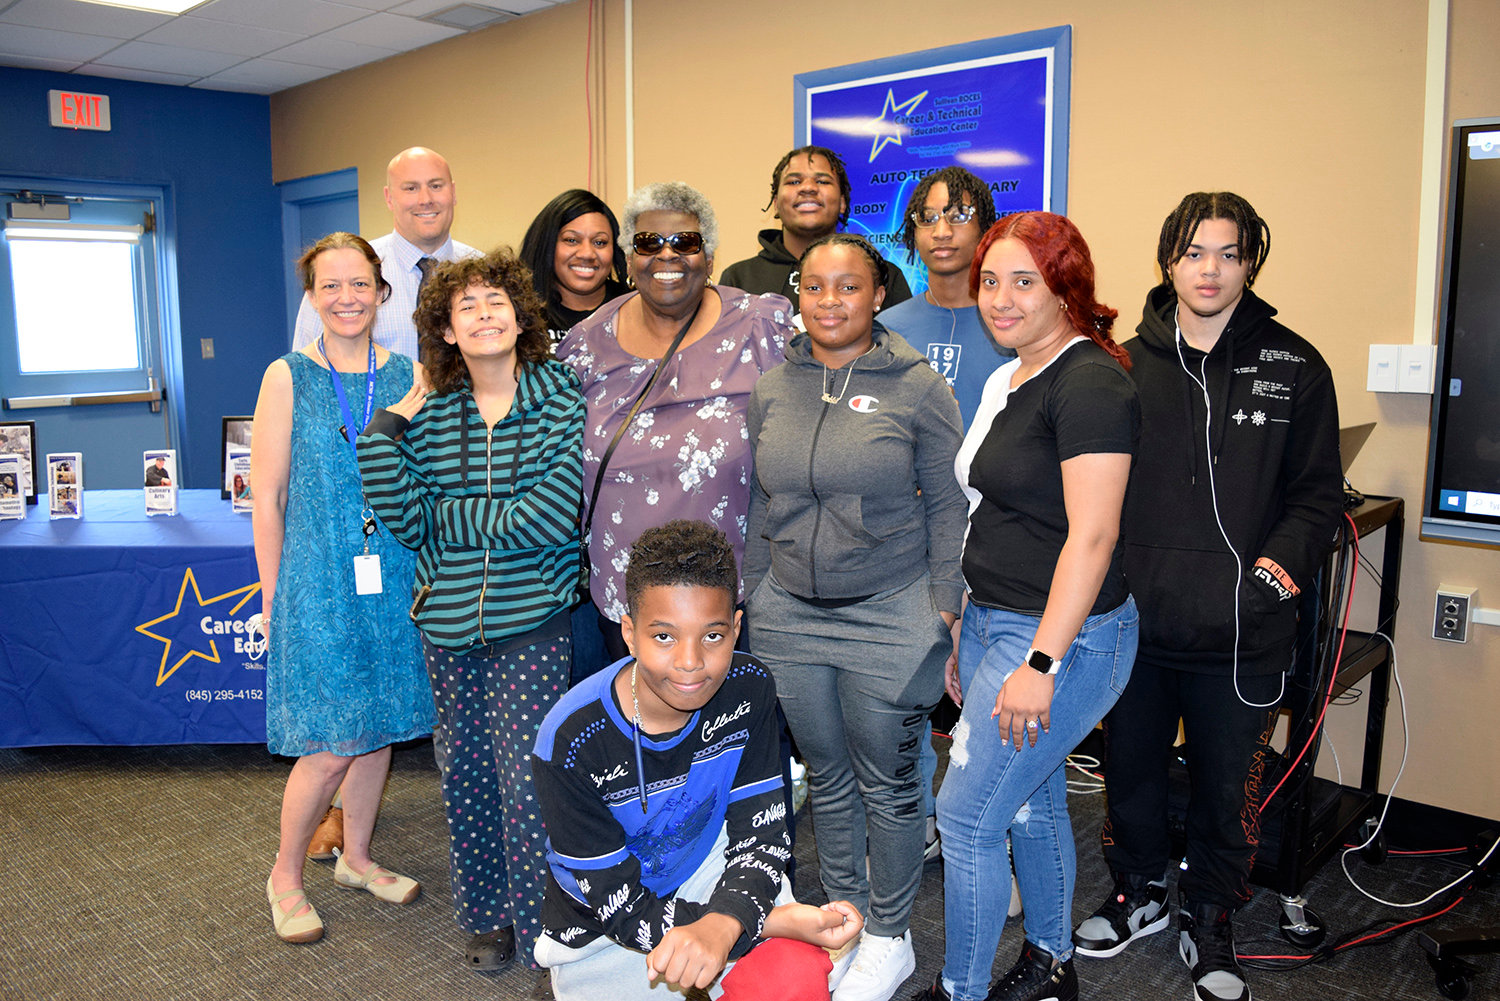 Opportunities await. Pictured are members of Monticello's My Brothers Keeper, vice-chancellor Josephine Finn and leaders from Monticello High School and Sullivan BOCES.   Back row: Dana Taylor, left; Jeffery Molusky; Tiffany Hall; Malachi Smith; Shaheem Rutledge and Tyree Brown. Front row: Abigail Rivera, Finn, Nylia Cole and Jazlyn Velazques. Kneeling: Zavion Merchant.